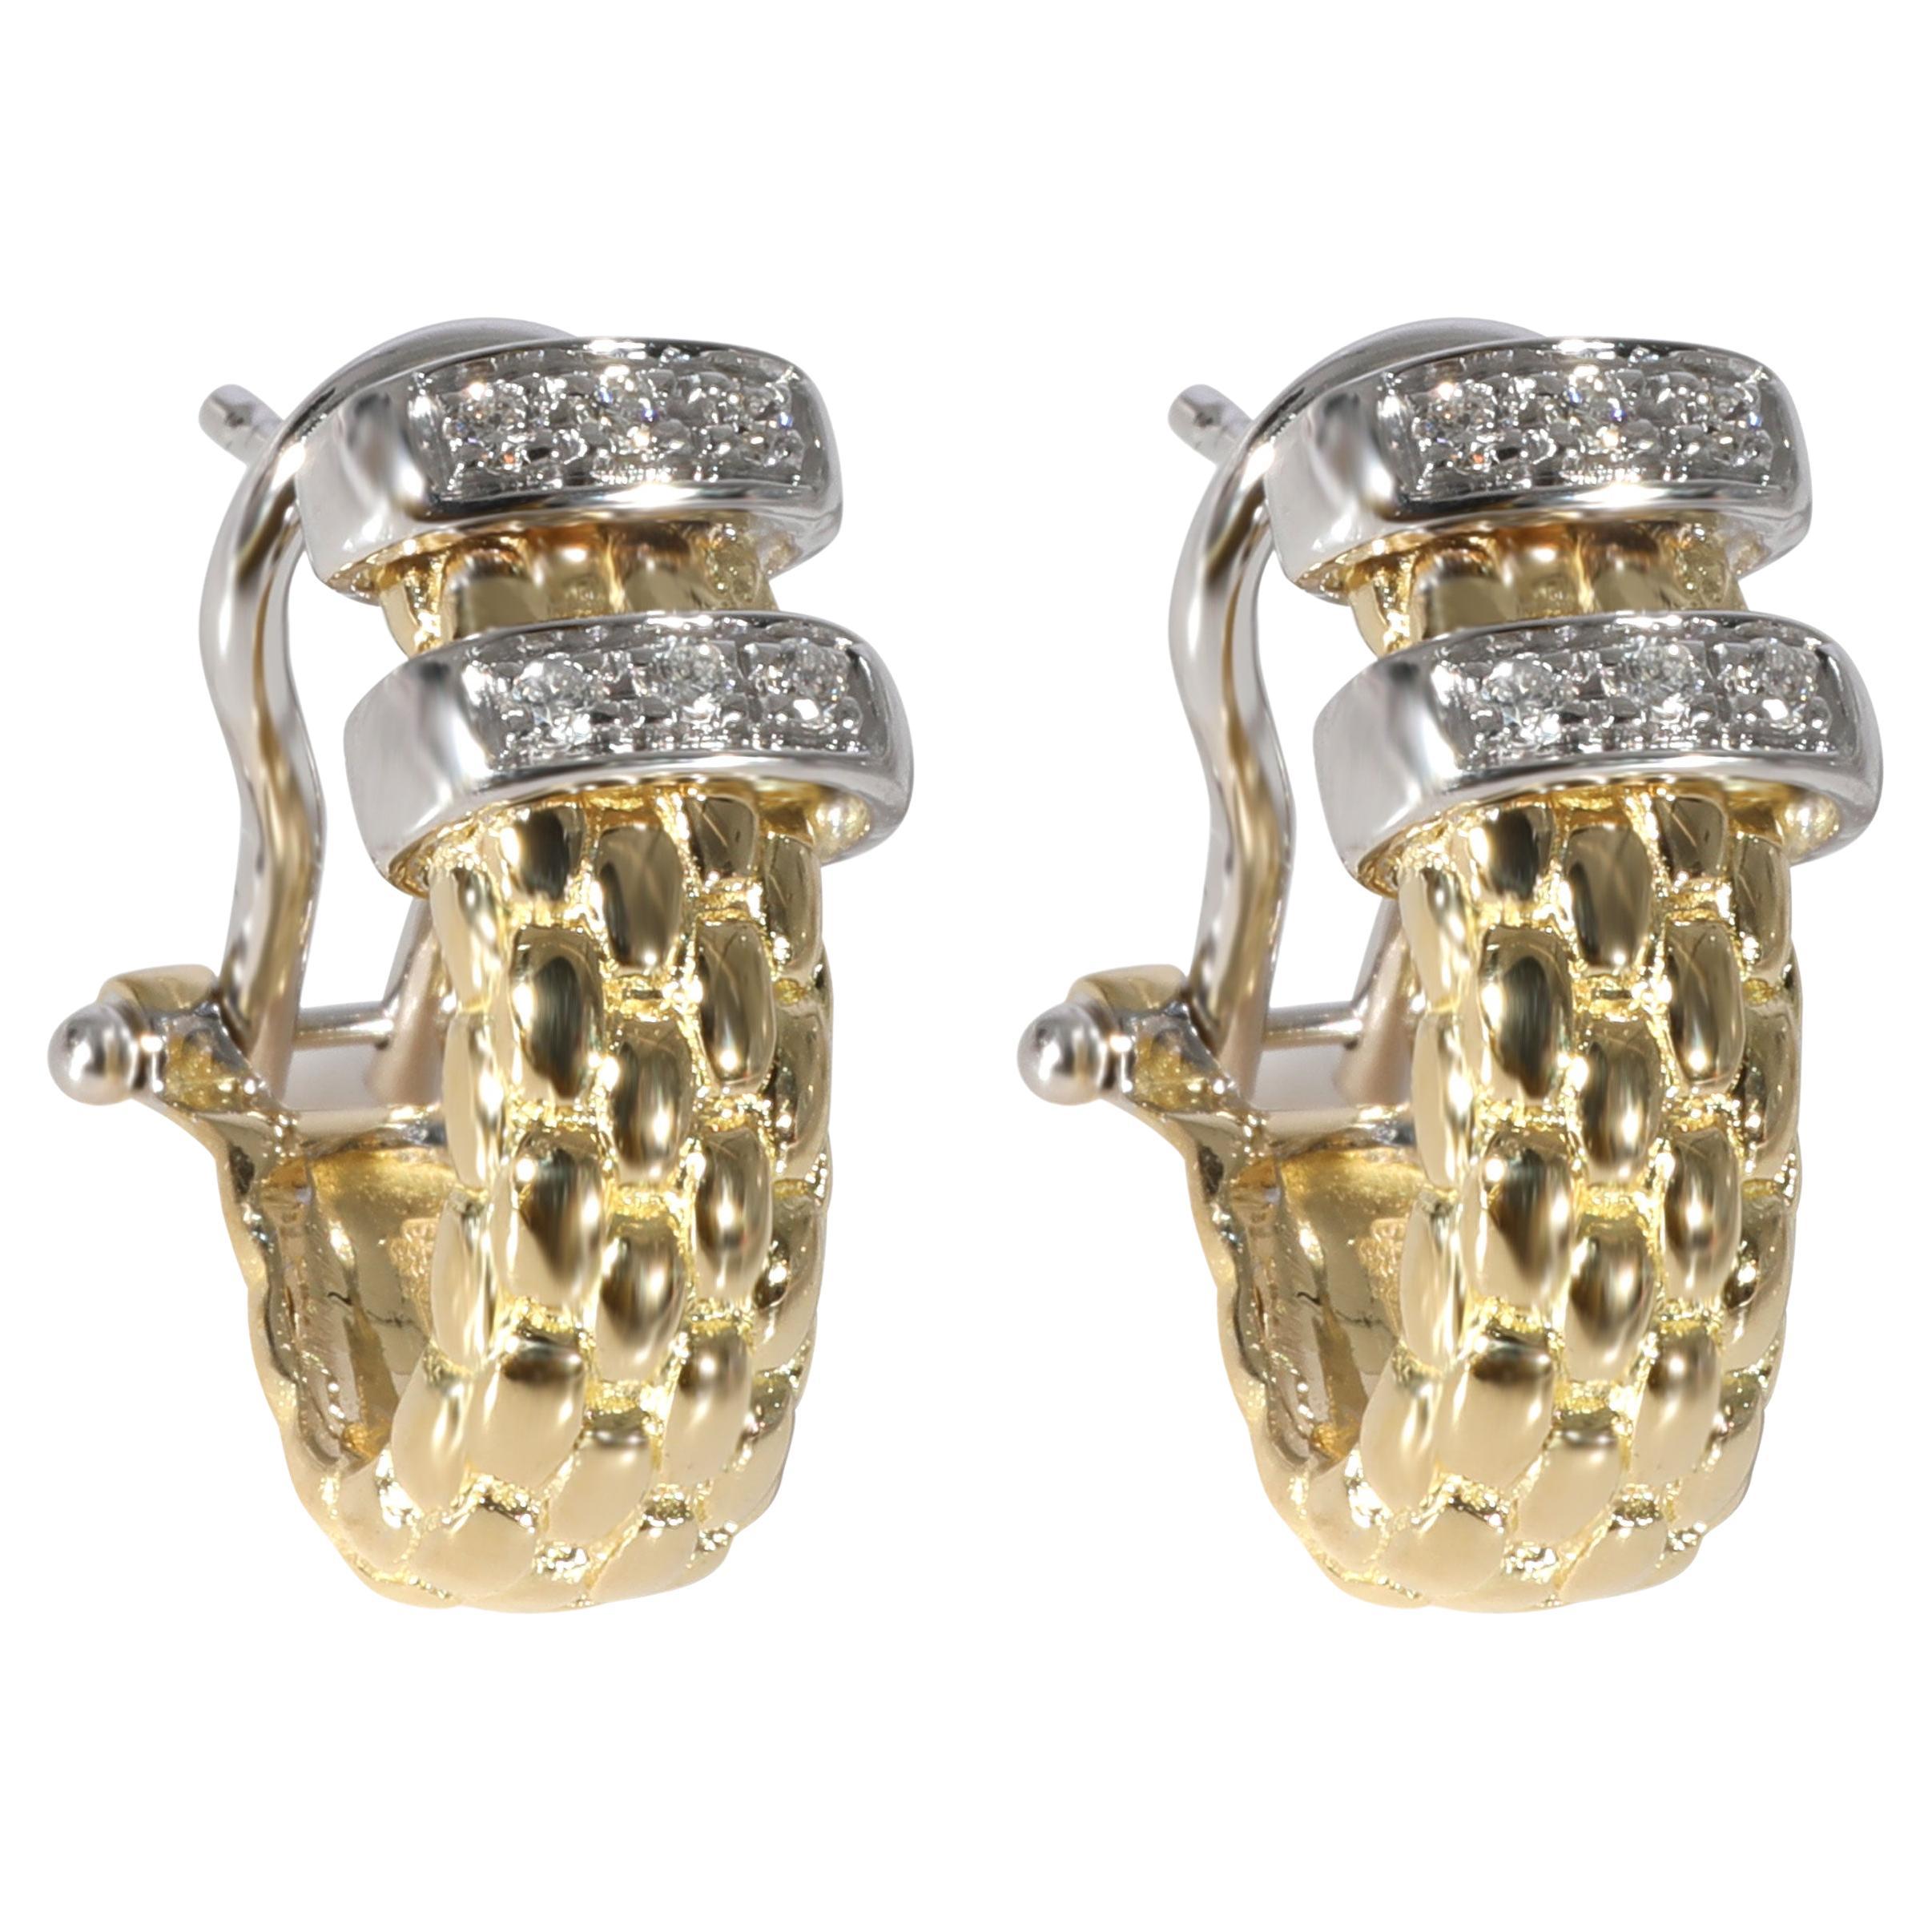 Fope Hoop Earring in 18k White Gold/Yellow Gold 0.11 CTW